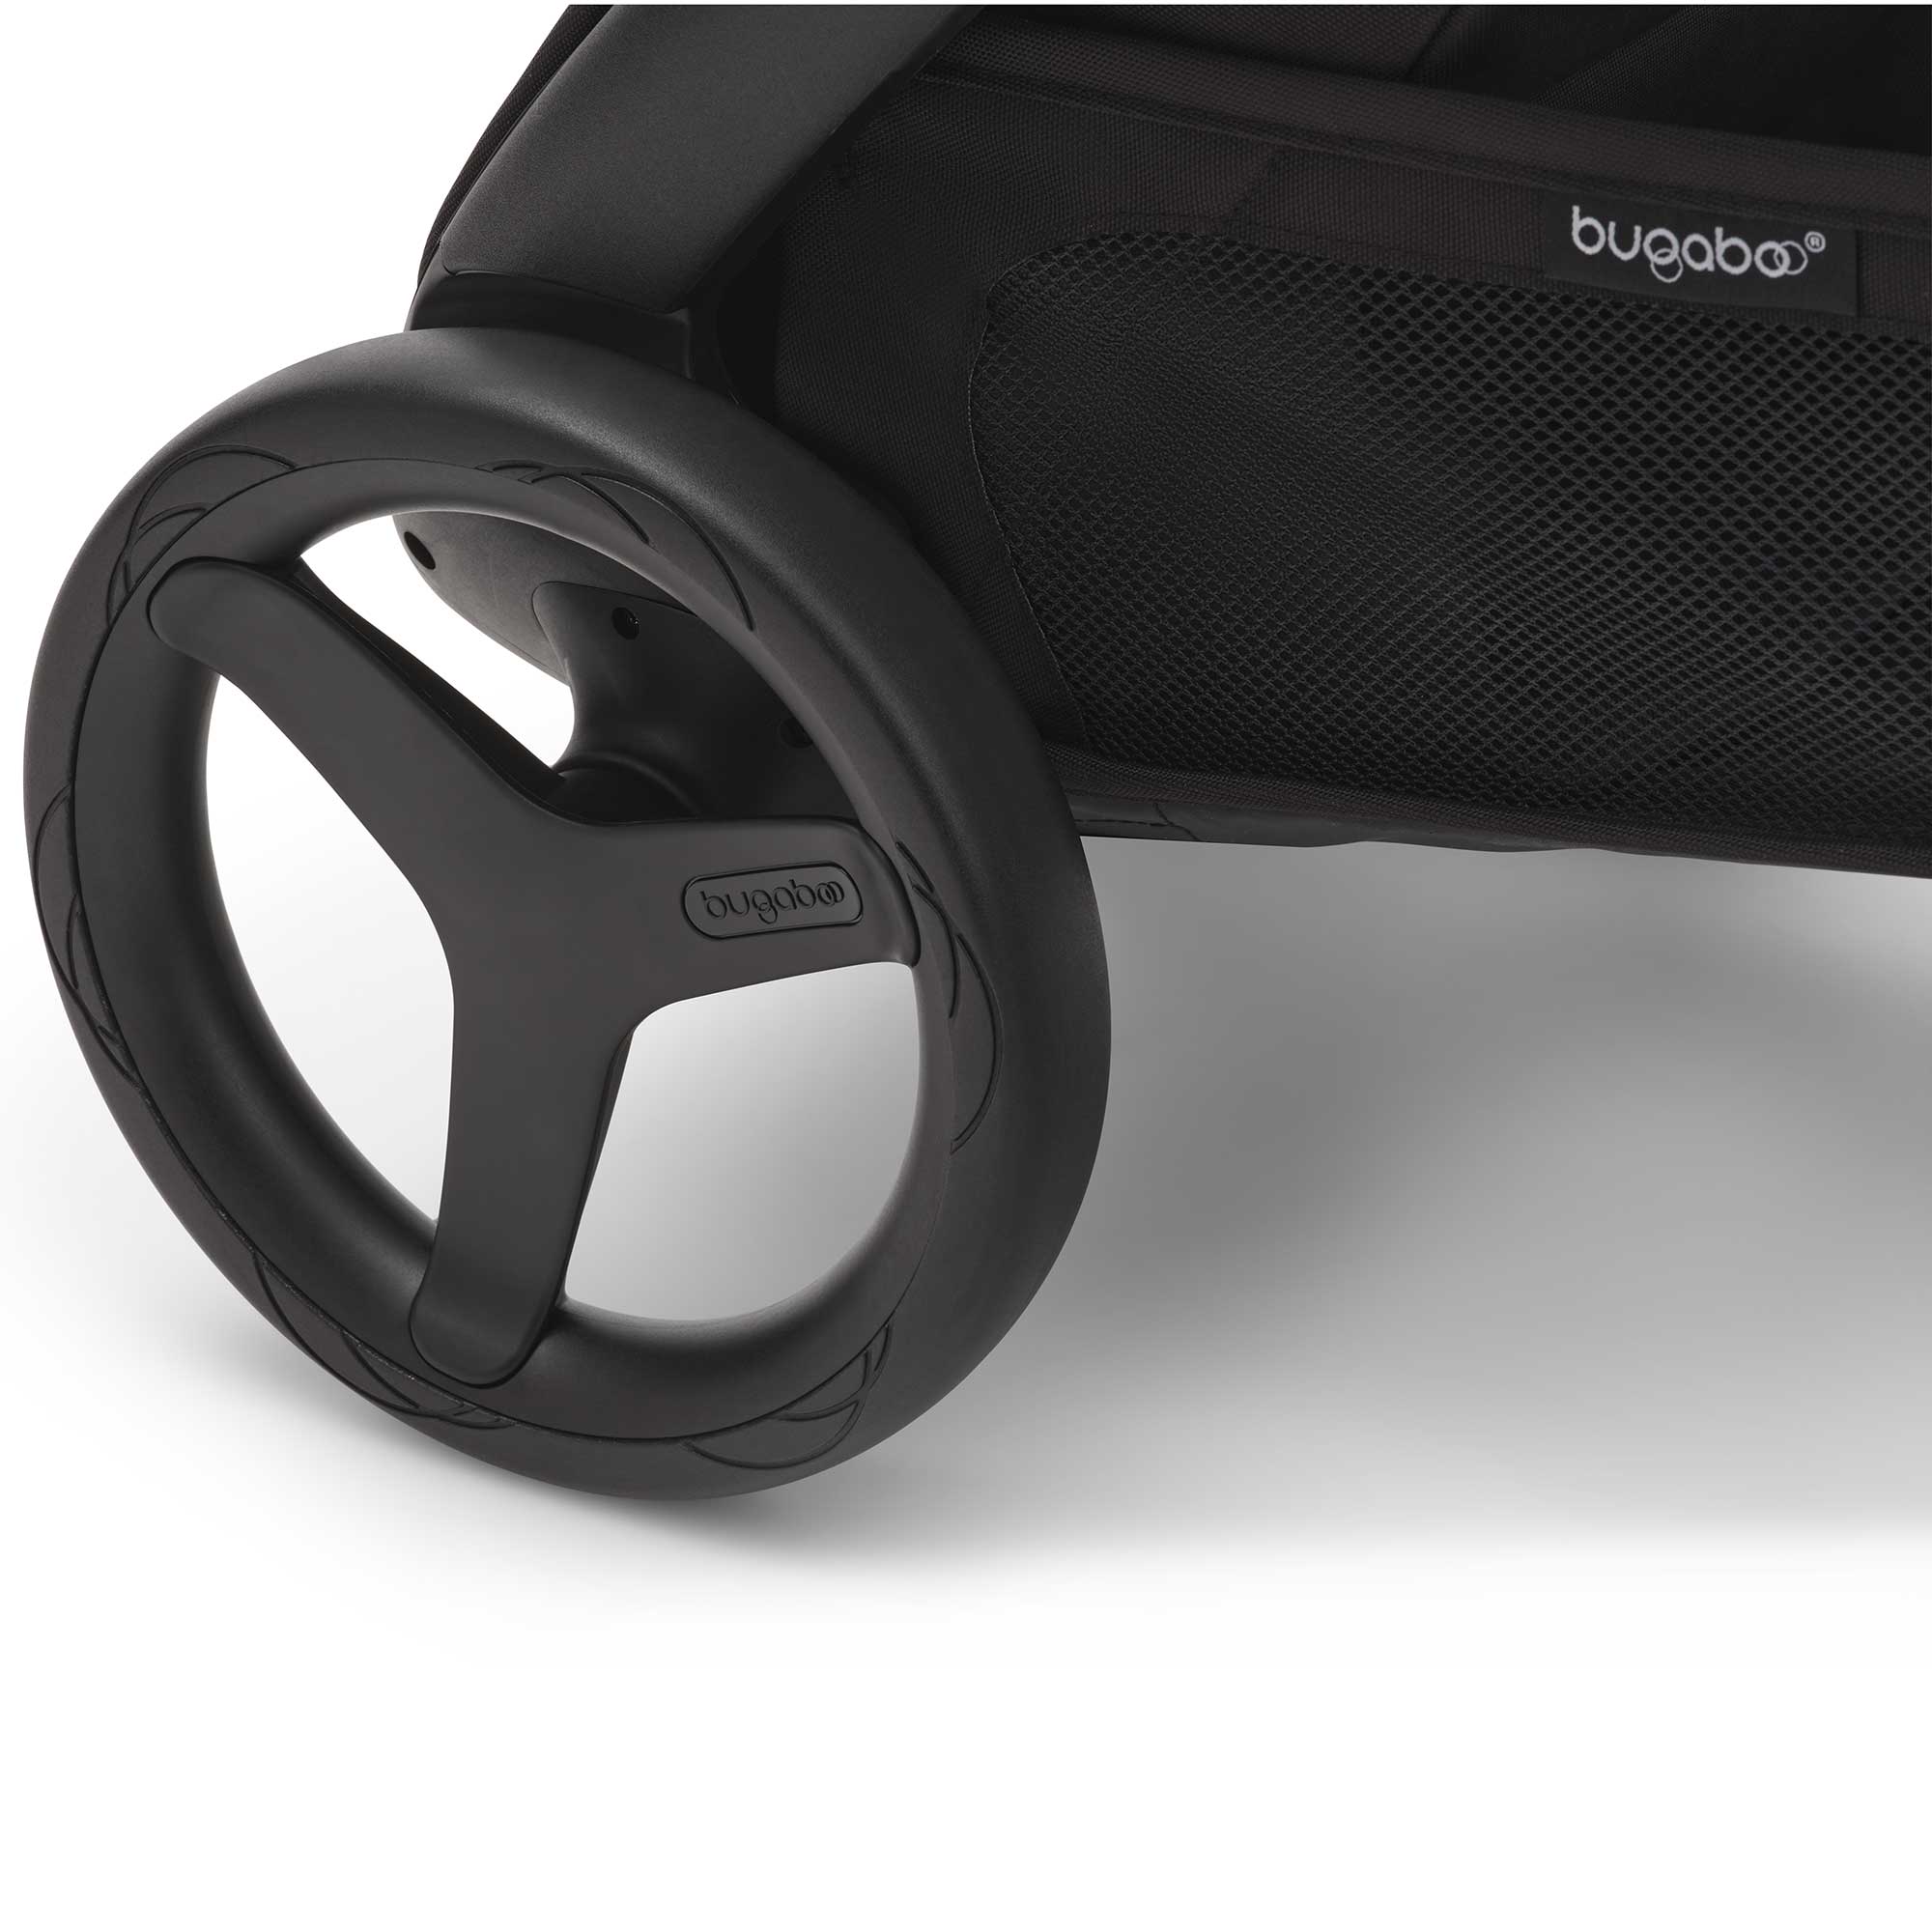 Bugaboo Travel Systems Bugaboo Dragonfly Ultimate Bundle - Black/Midnight Black 13809-BLK-MID-BLK